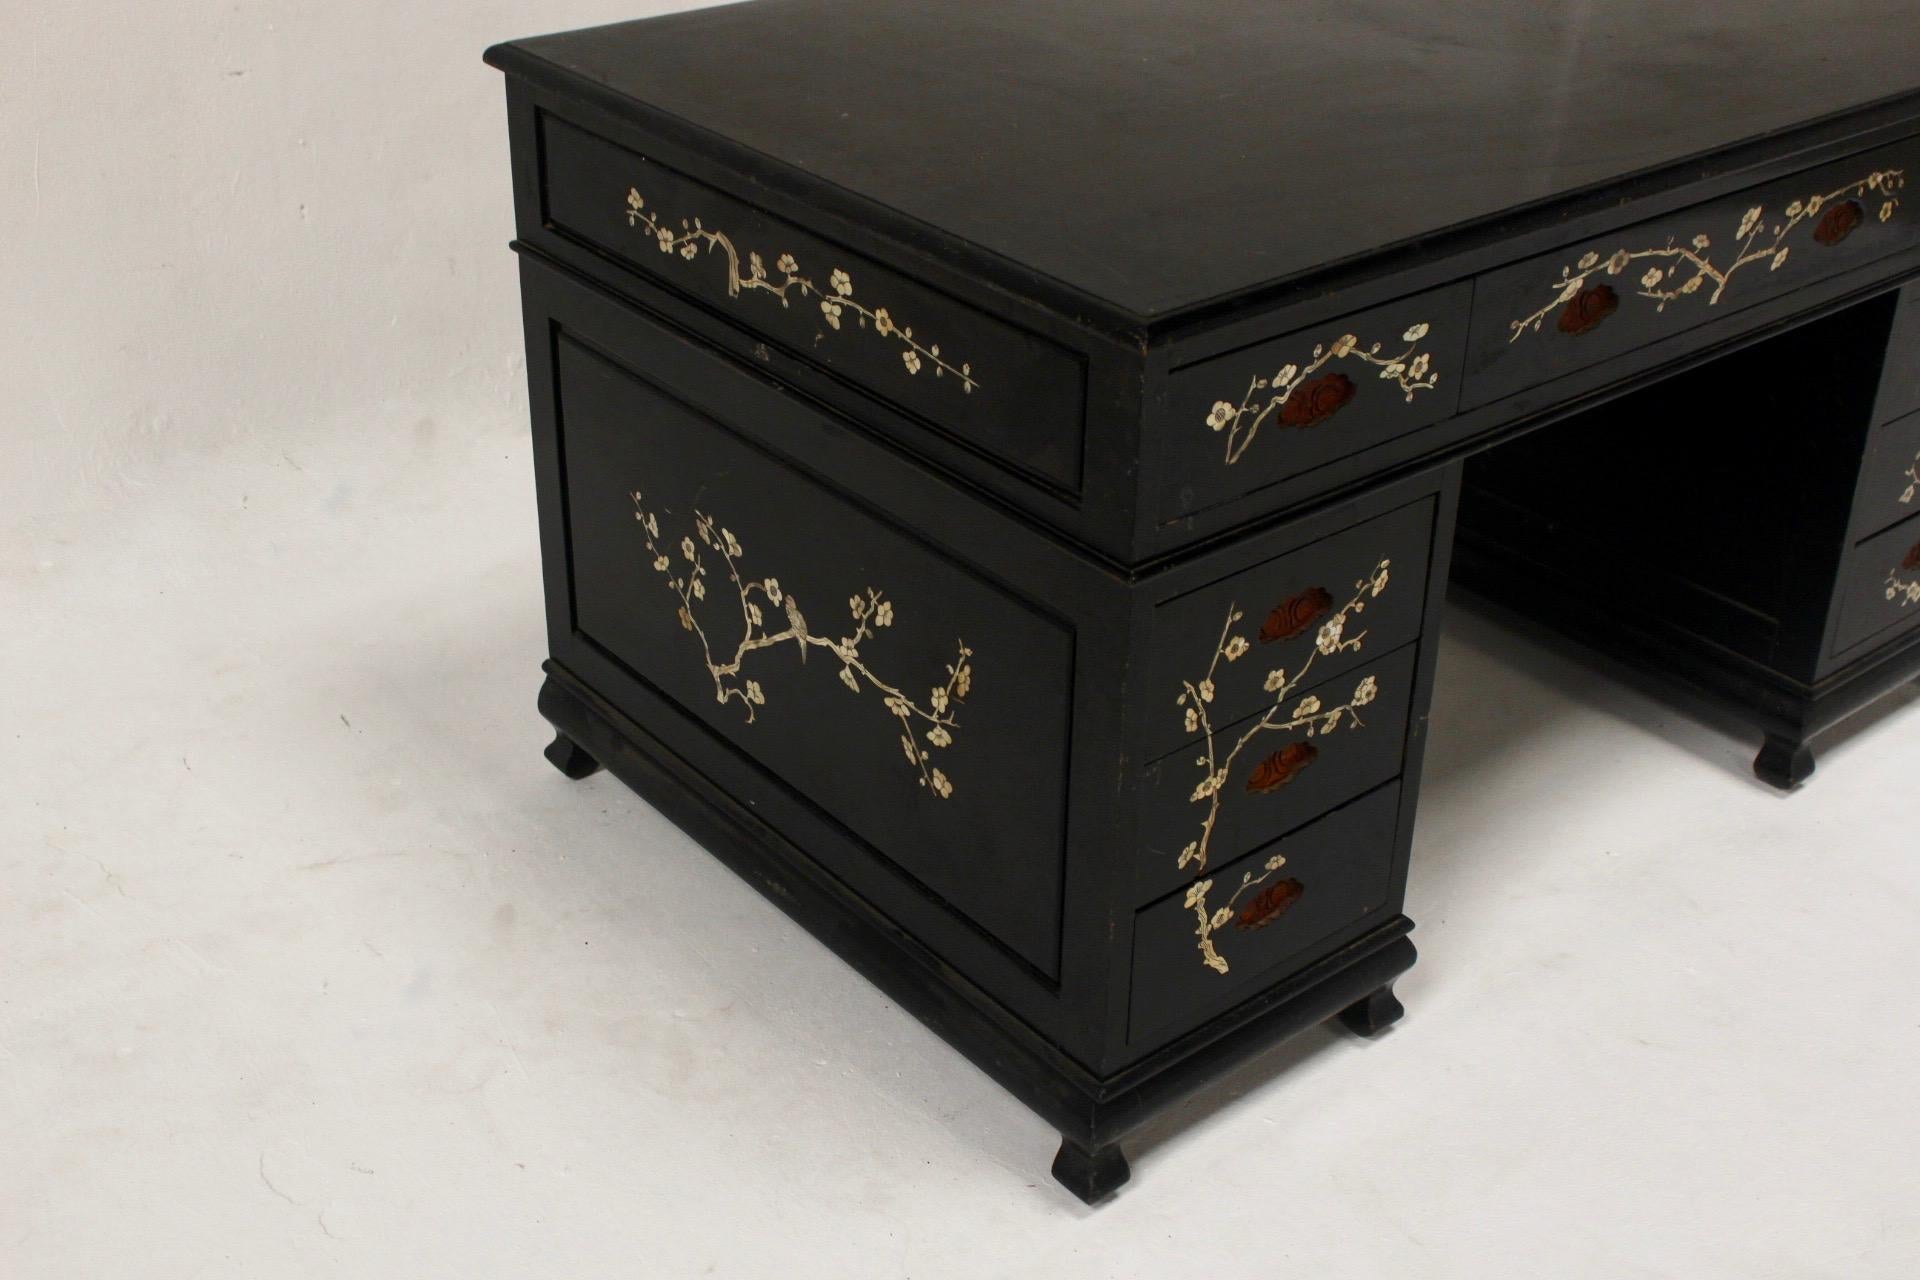 Chinoiserie Back Lacquered Art Deco Mother of Pearl Inlay Desk, Spain, 1940s For Sale 2